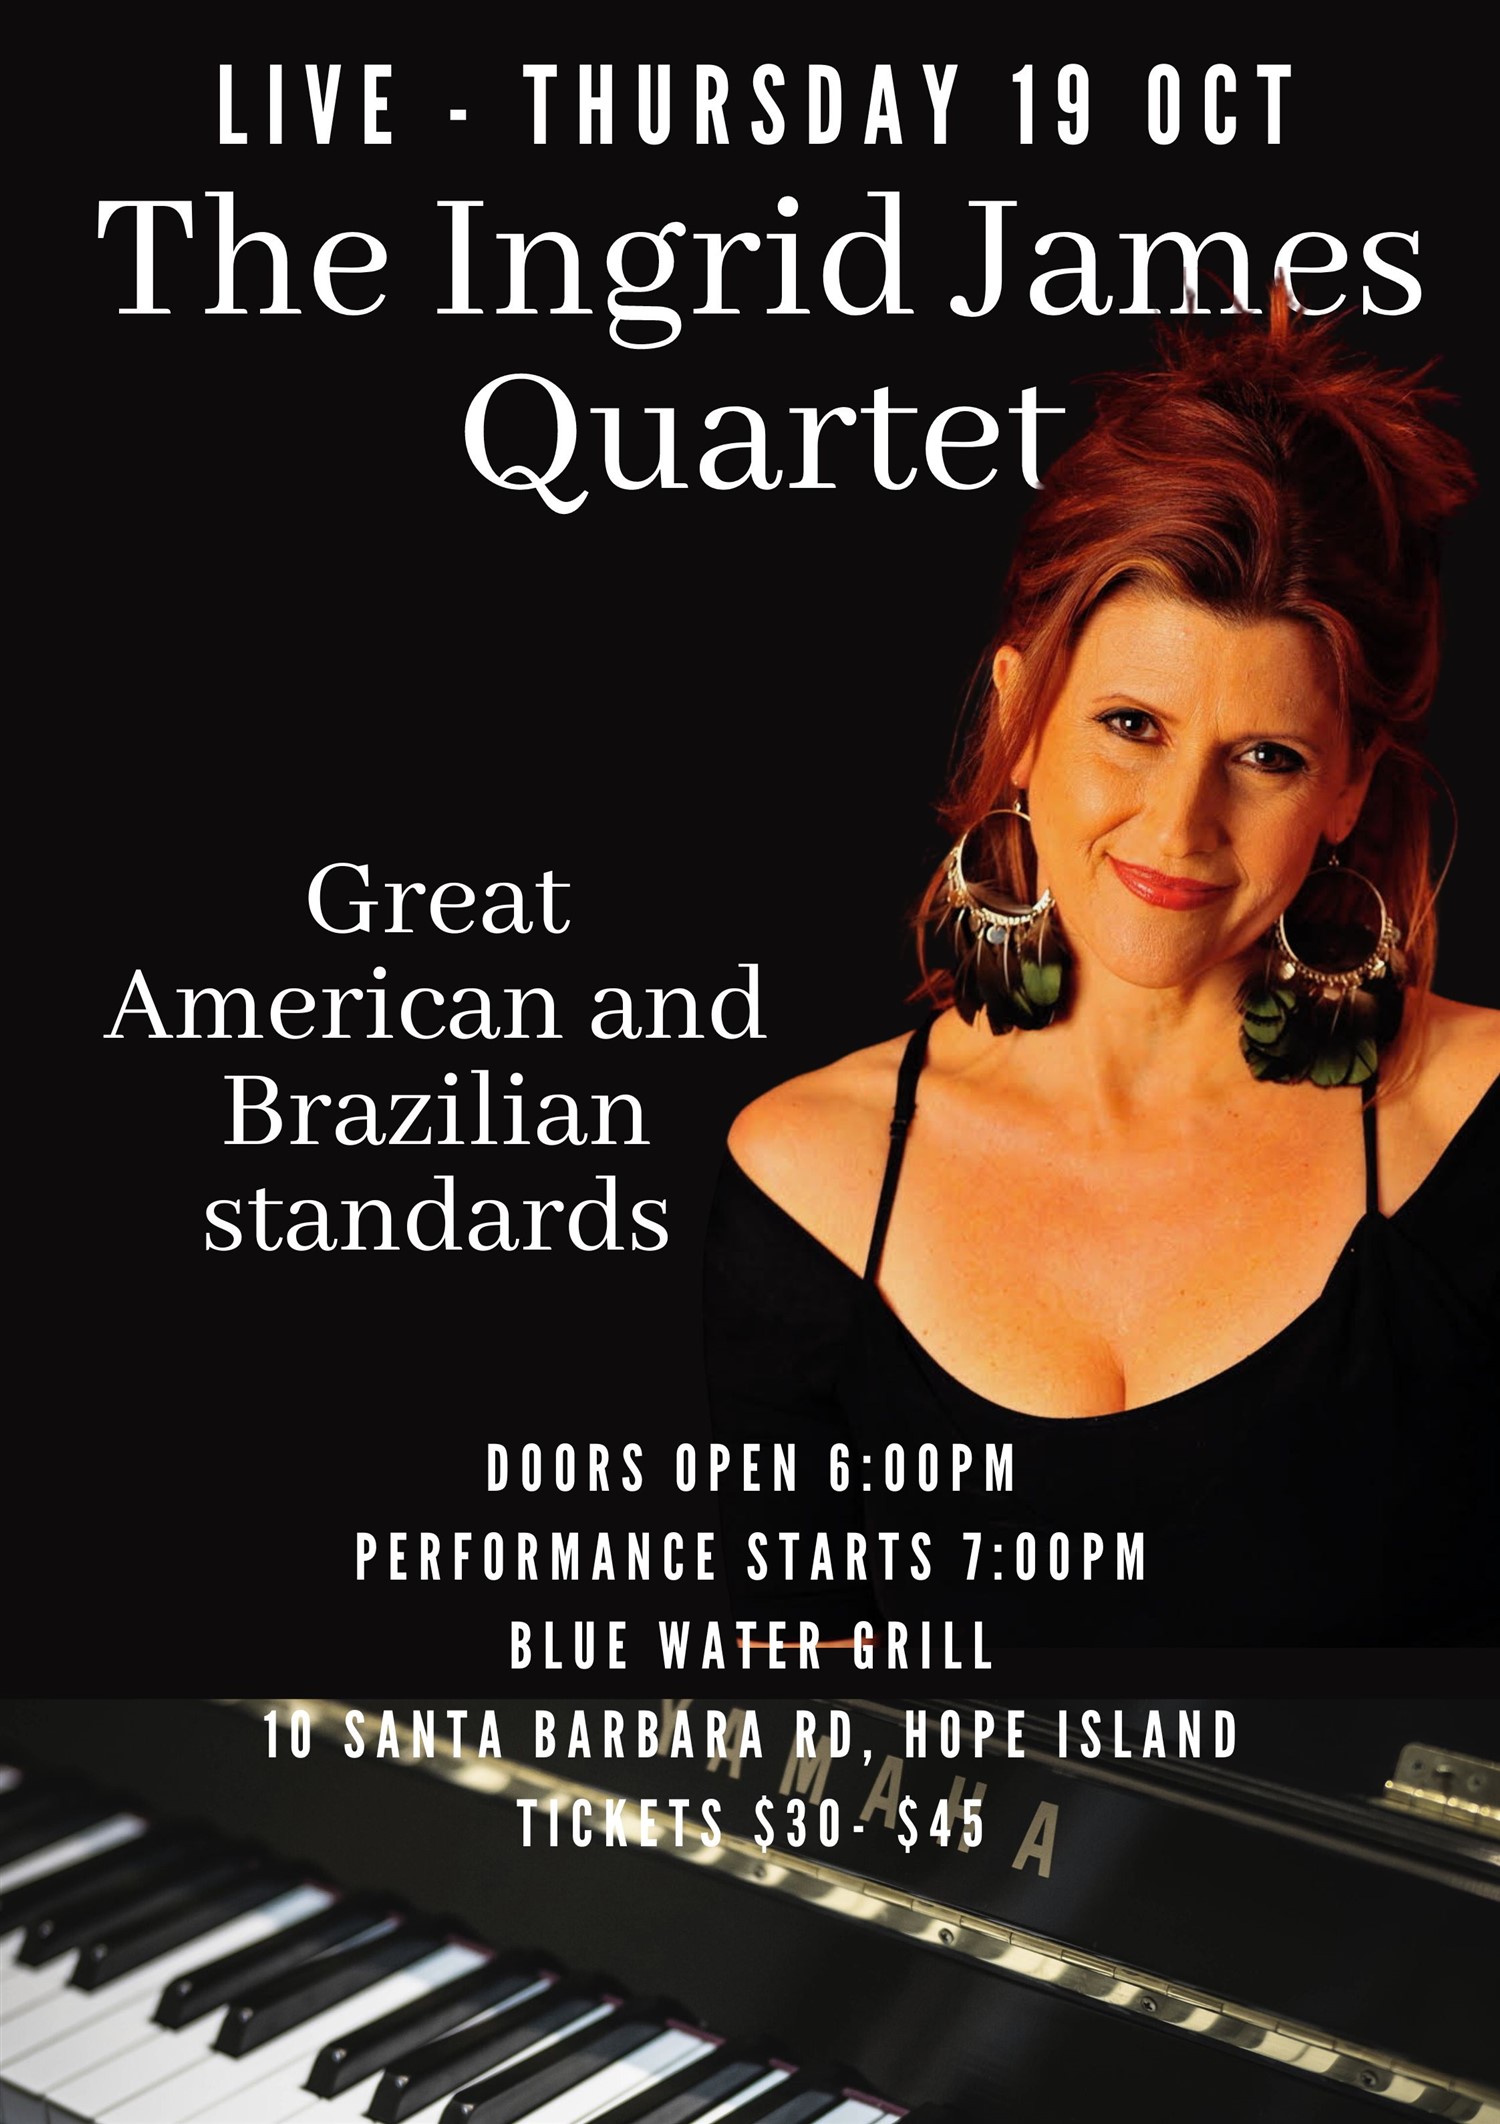 The Ingrid James Quartet Great American and Brazilian standards on Oct 19, 18:00@Hope Island Jazz - Blue Water Grill - Buy tickets and Get information on Hope Island Jazz hopeislandjazz.com.au